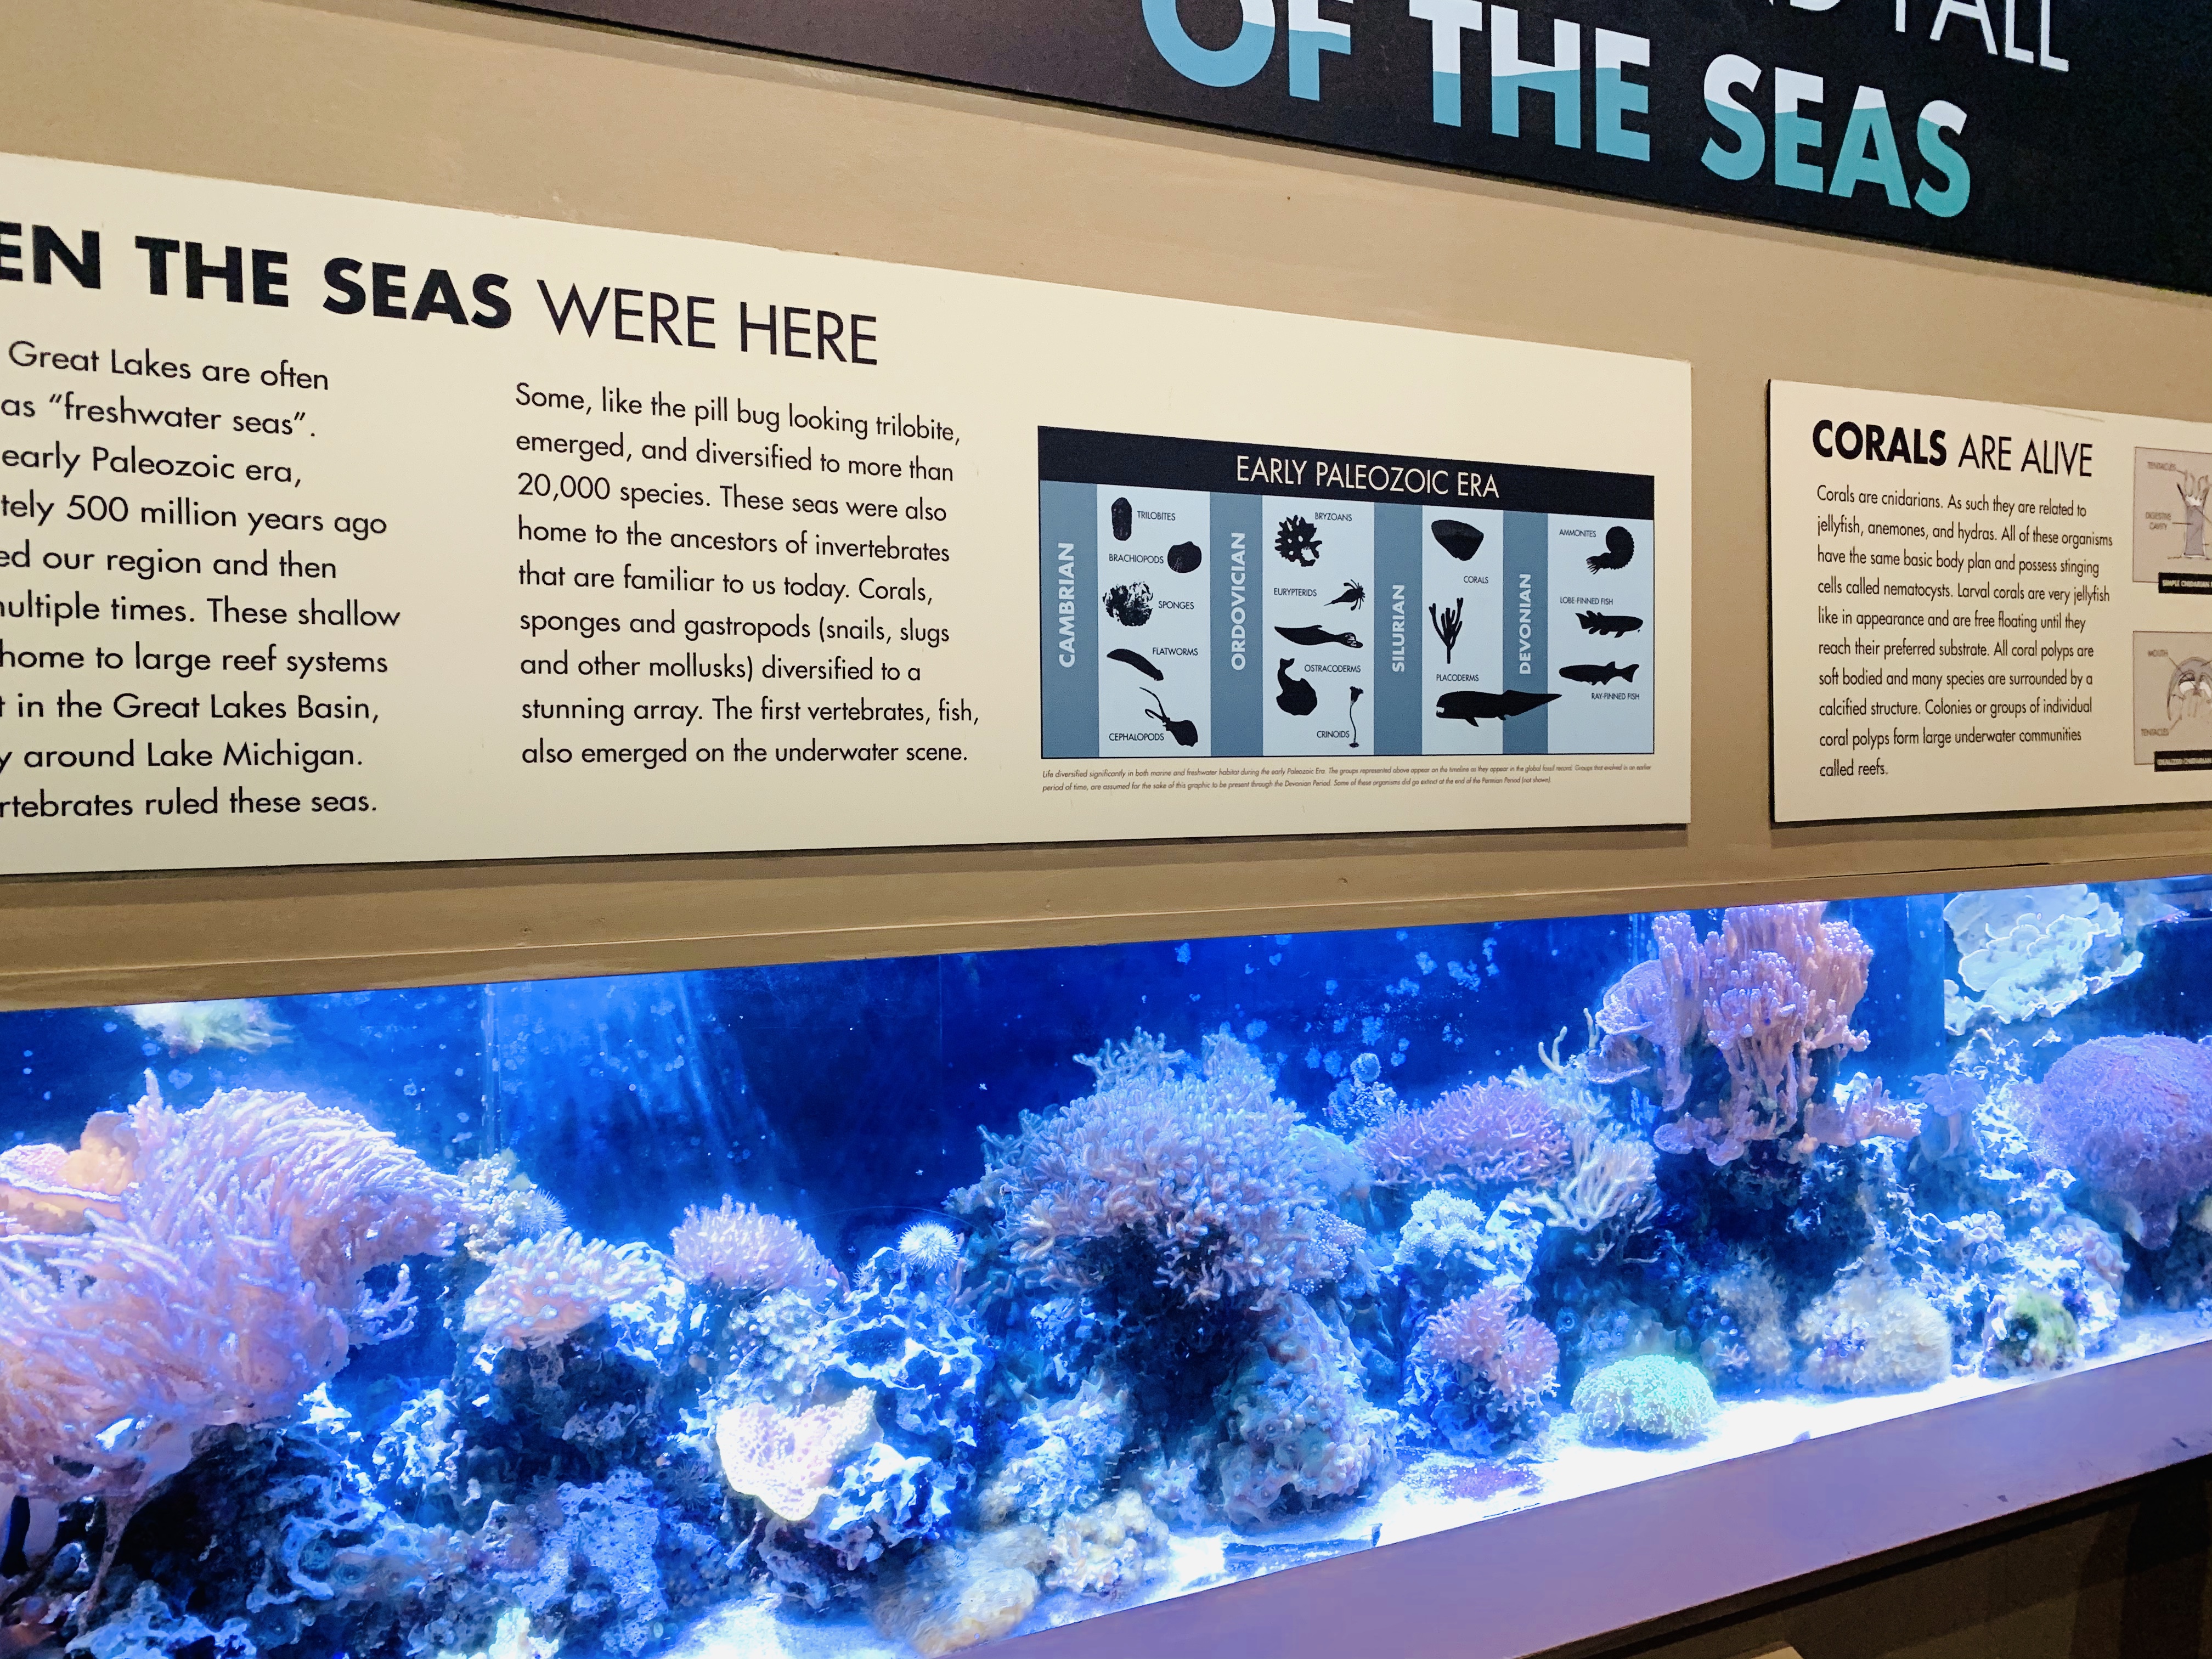 Read all about an experience at Duluth, MN's Great Lakes Aquarium from top U.S. family travel blog, Travel With A Plan!  They'll fill you in on what to expect while visiting and on whether or not a trip to the aquarium is worth the cost.  Click here now!  #duluthaquarium #duluthattractions #duluth #greatlakesaquarium #lakesuperior #duluthmnthingstodo